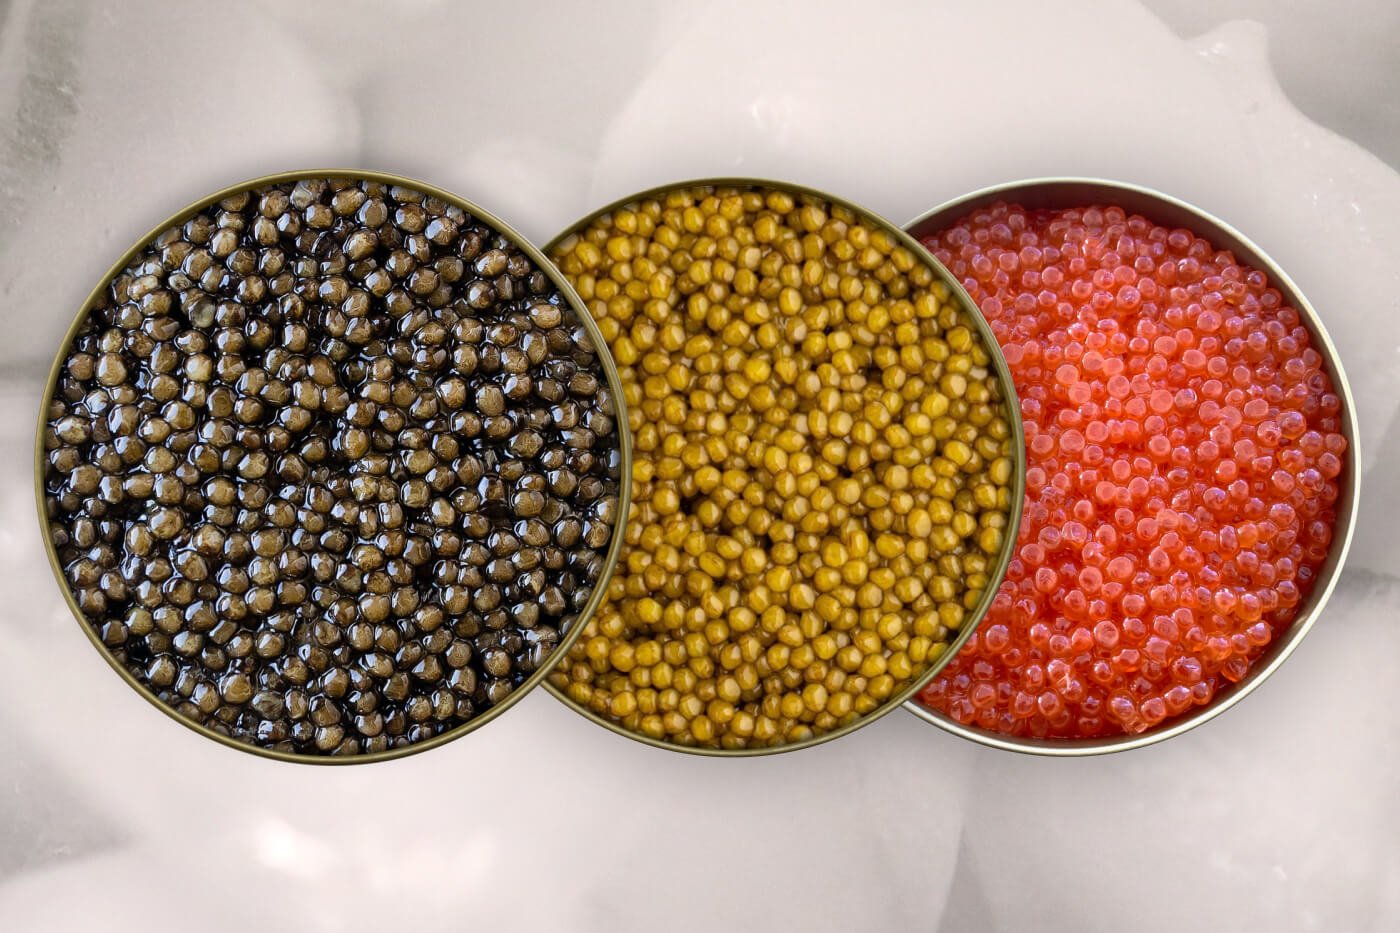 What color is caviar?